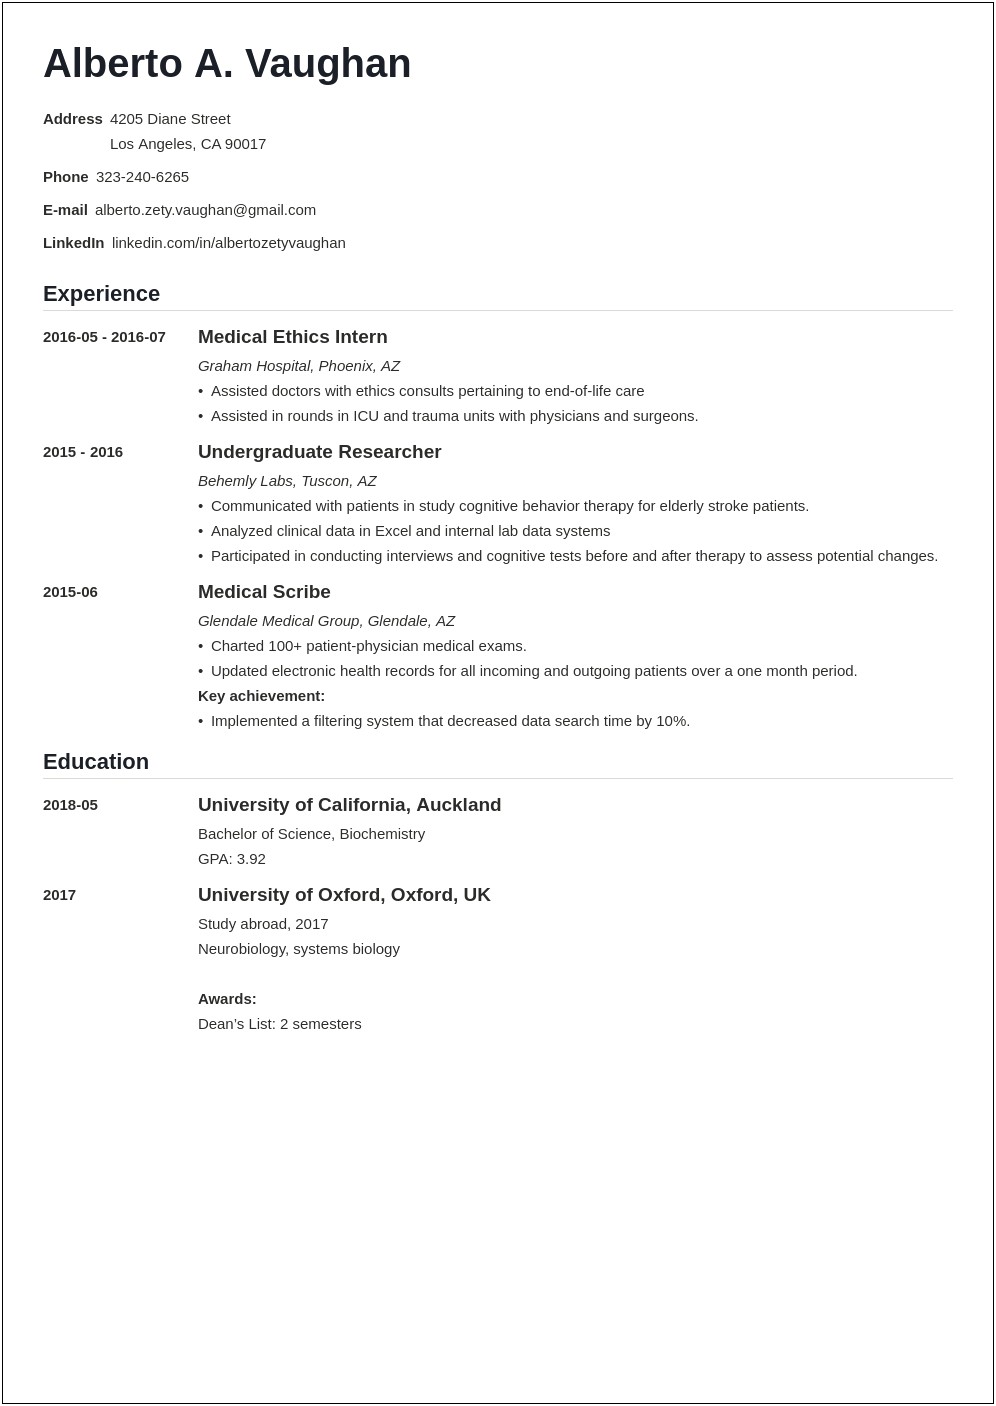 Free Resume Templates For Medical Residents